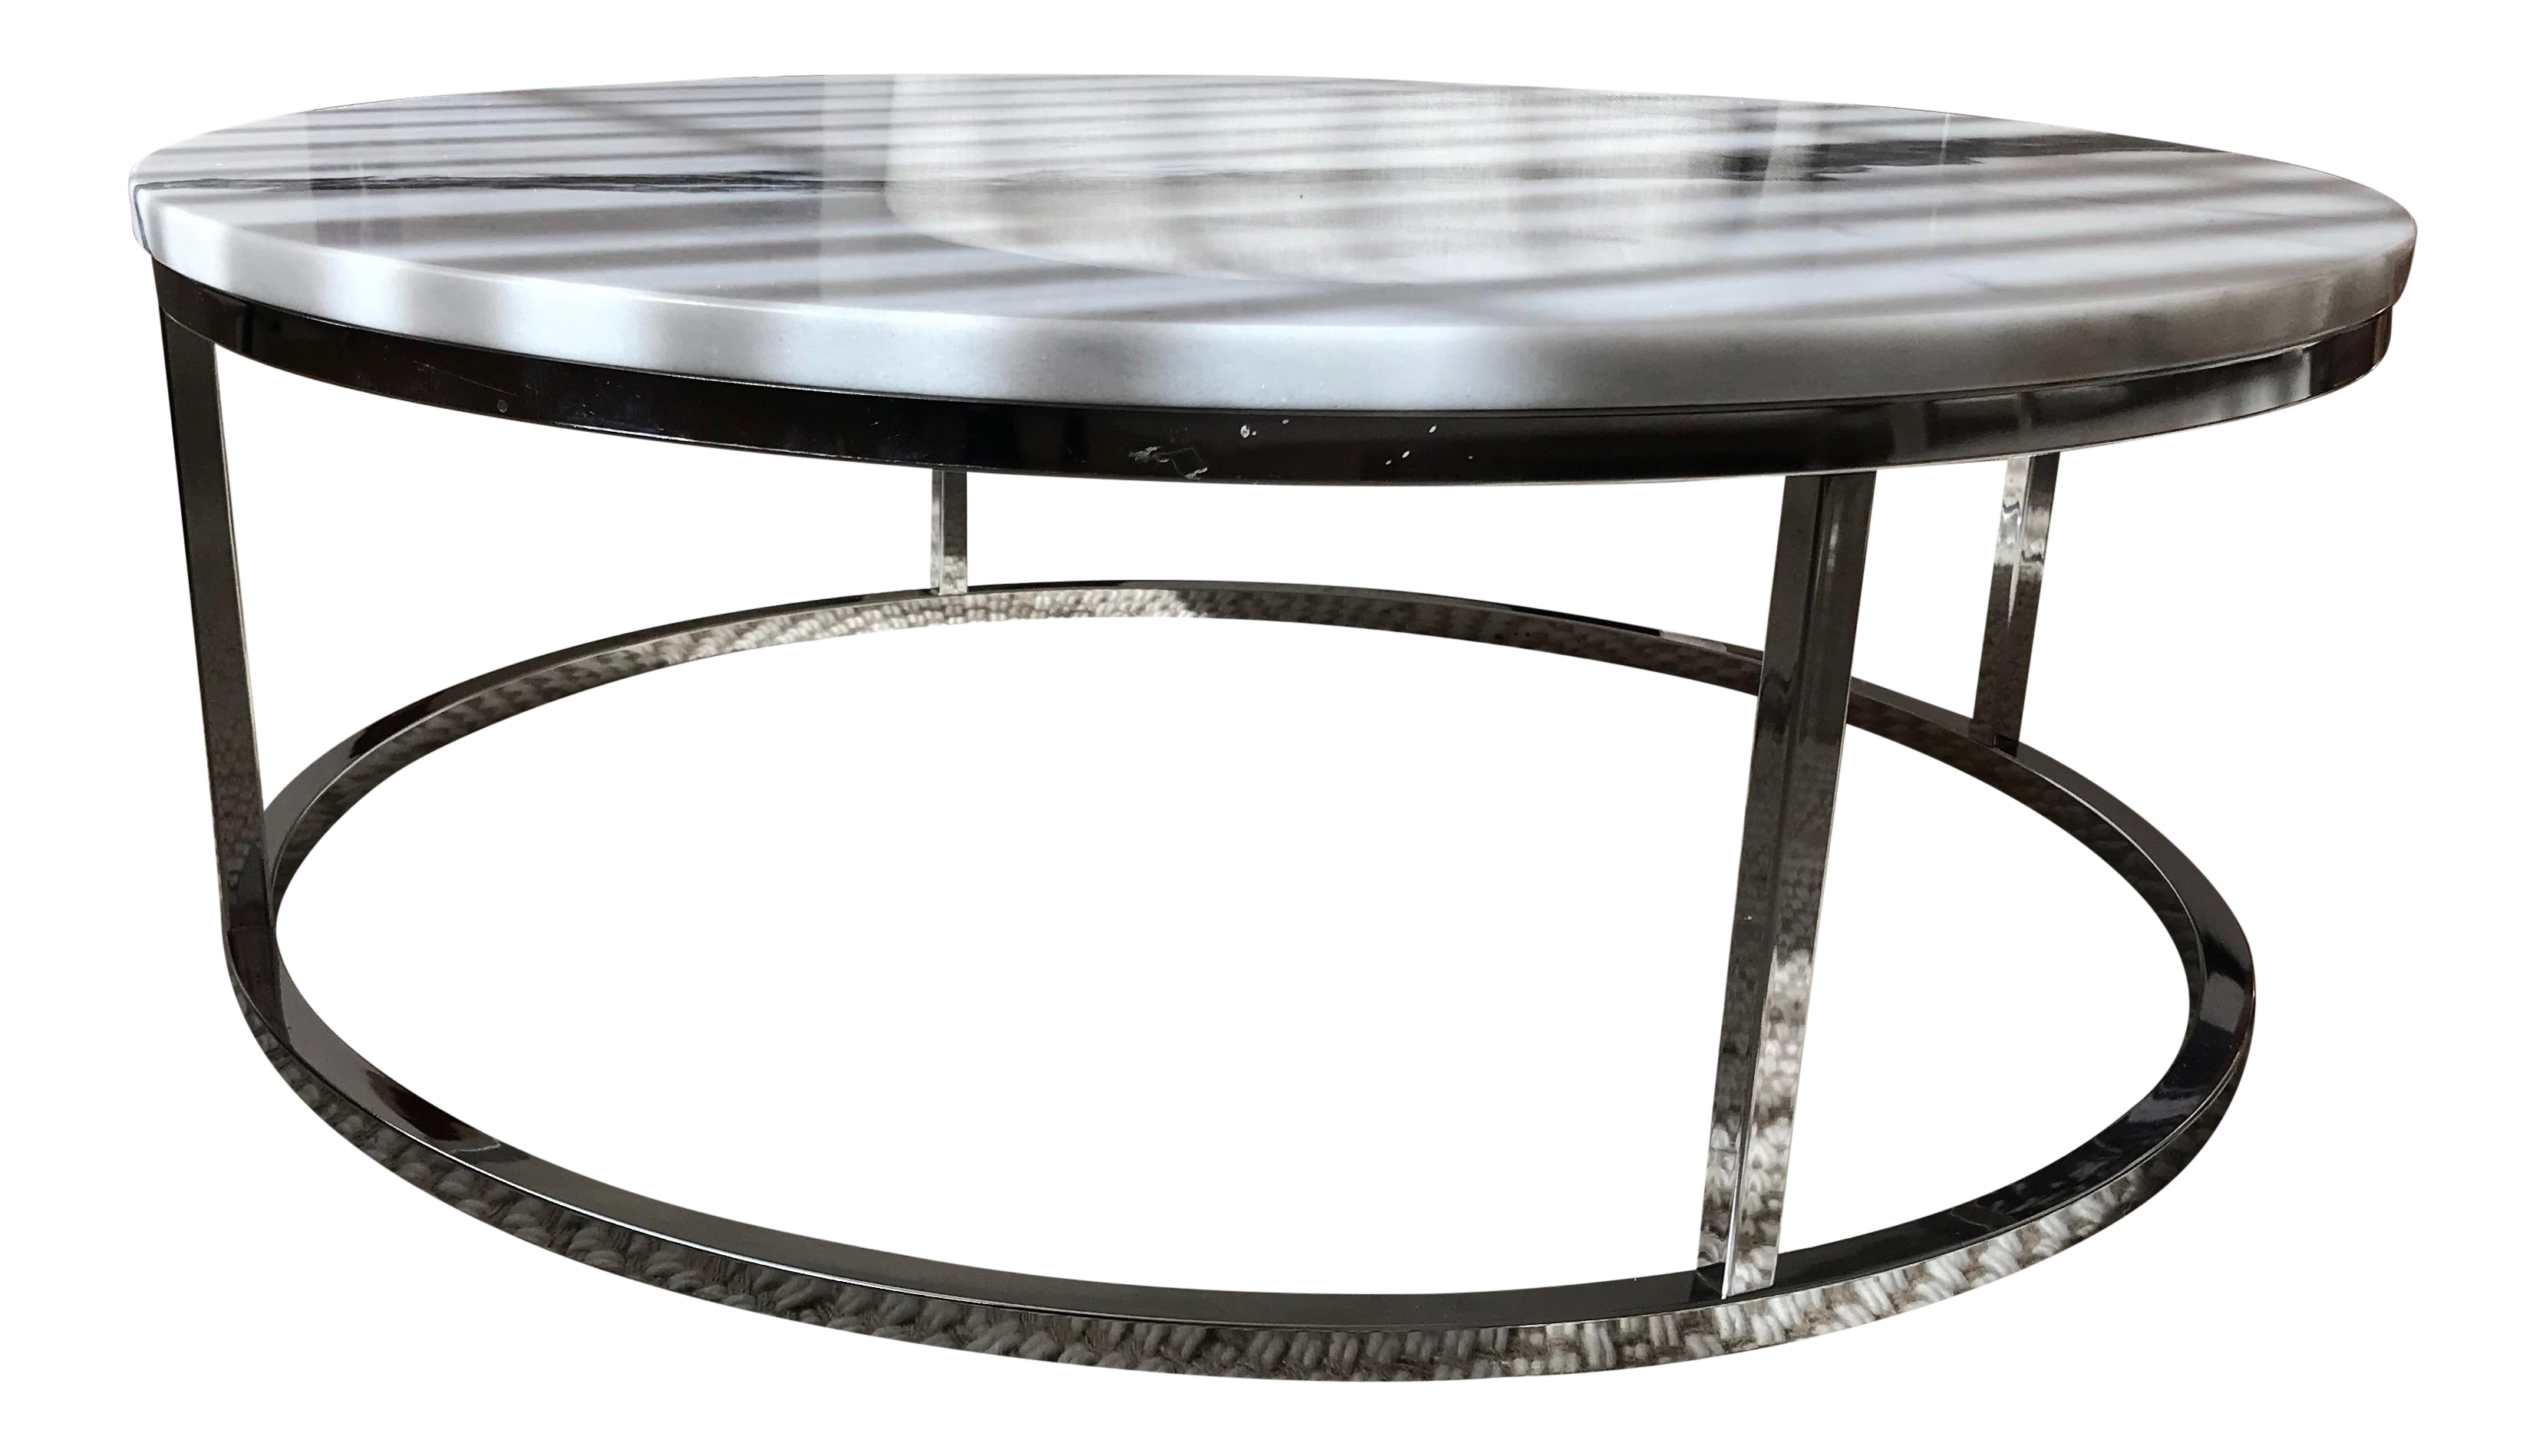 Advantages of choosing a smart round
marble top coffee table